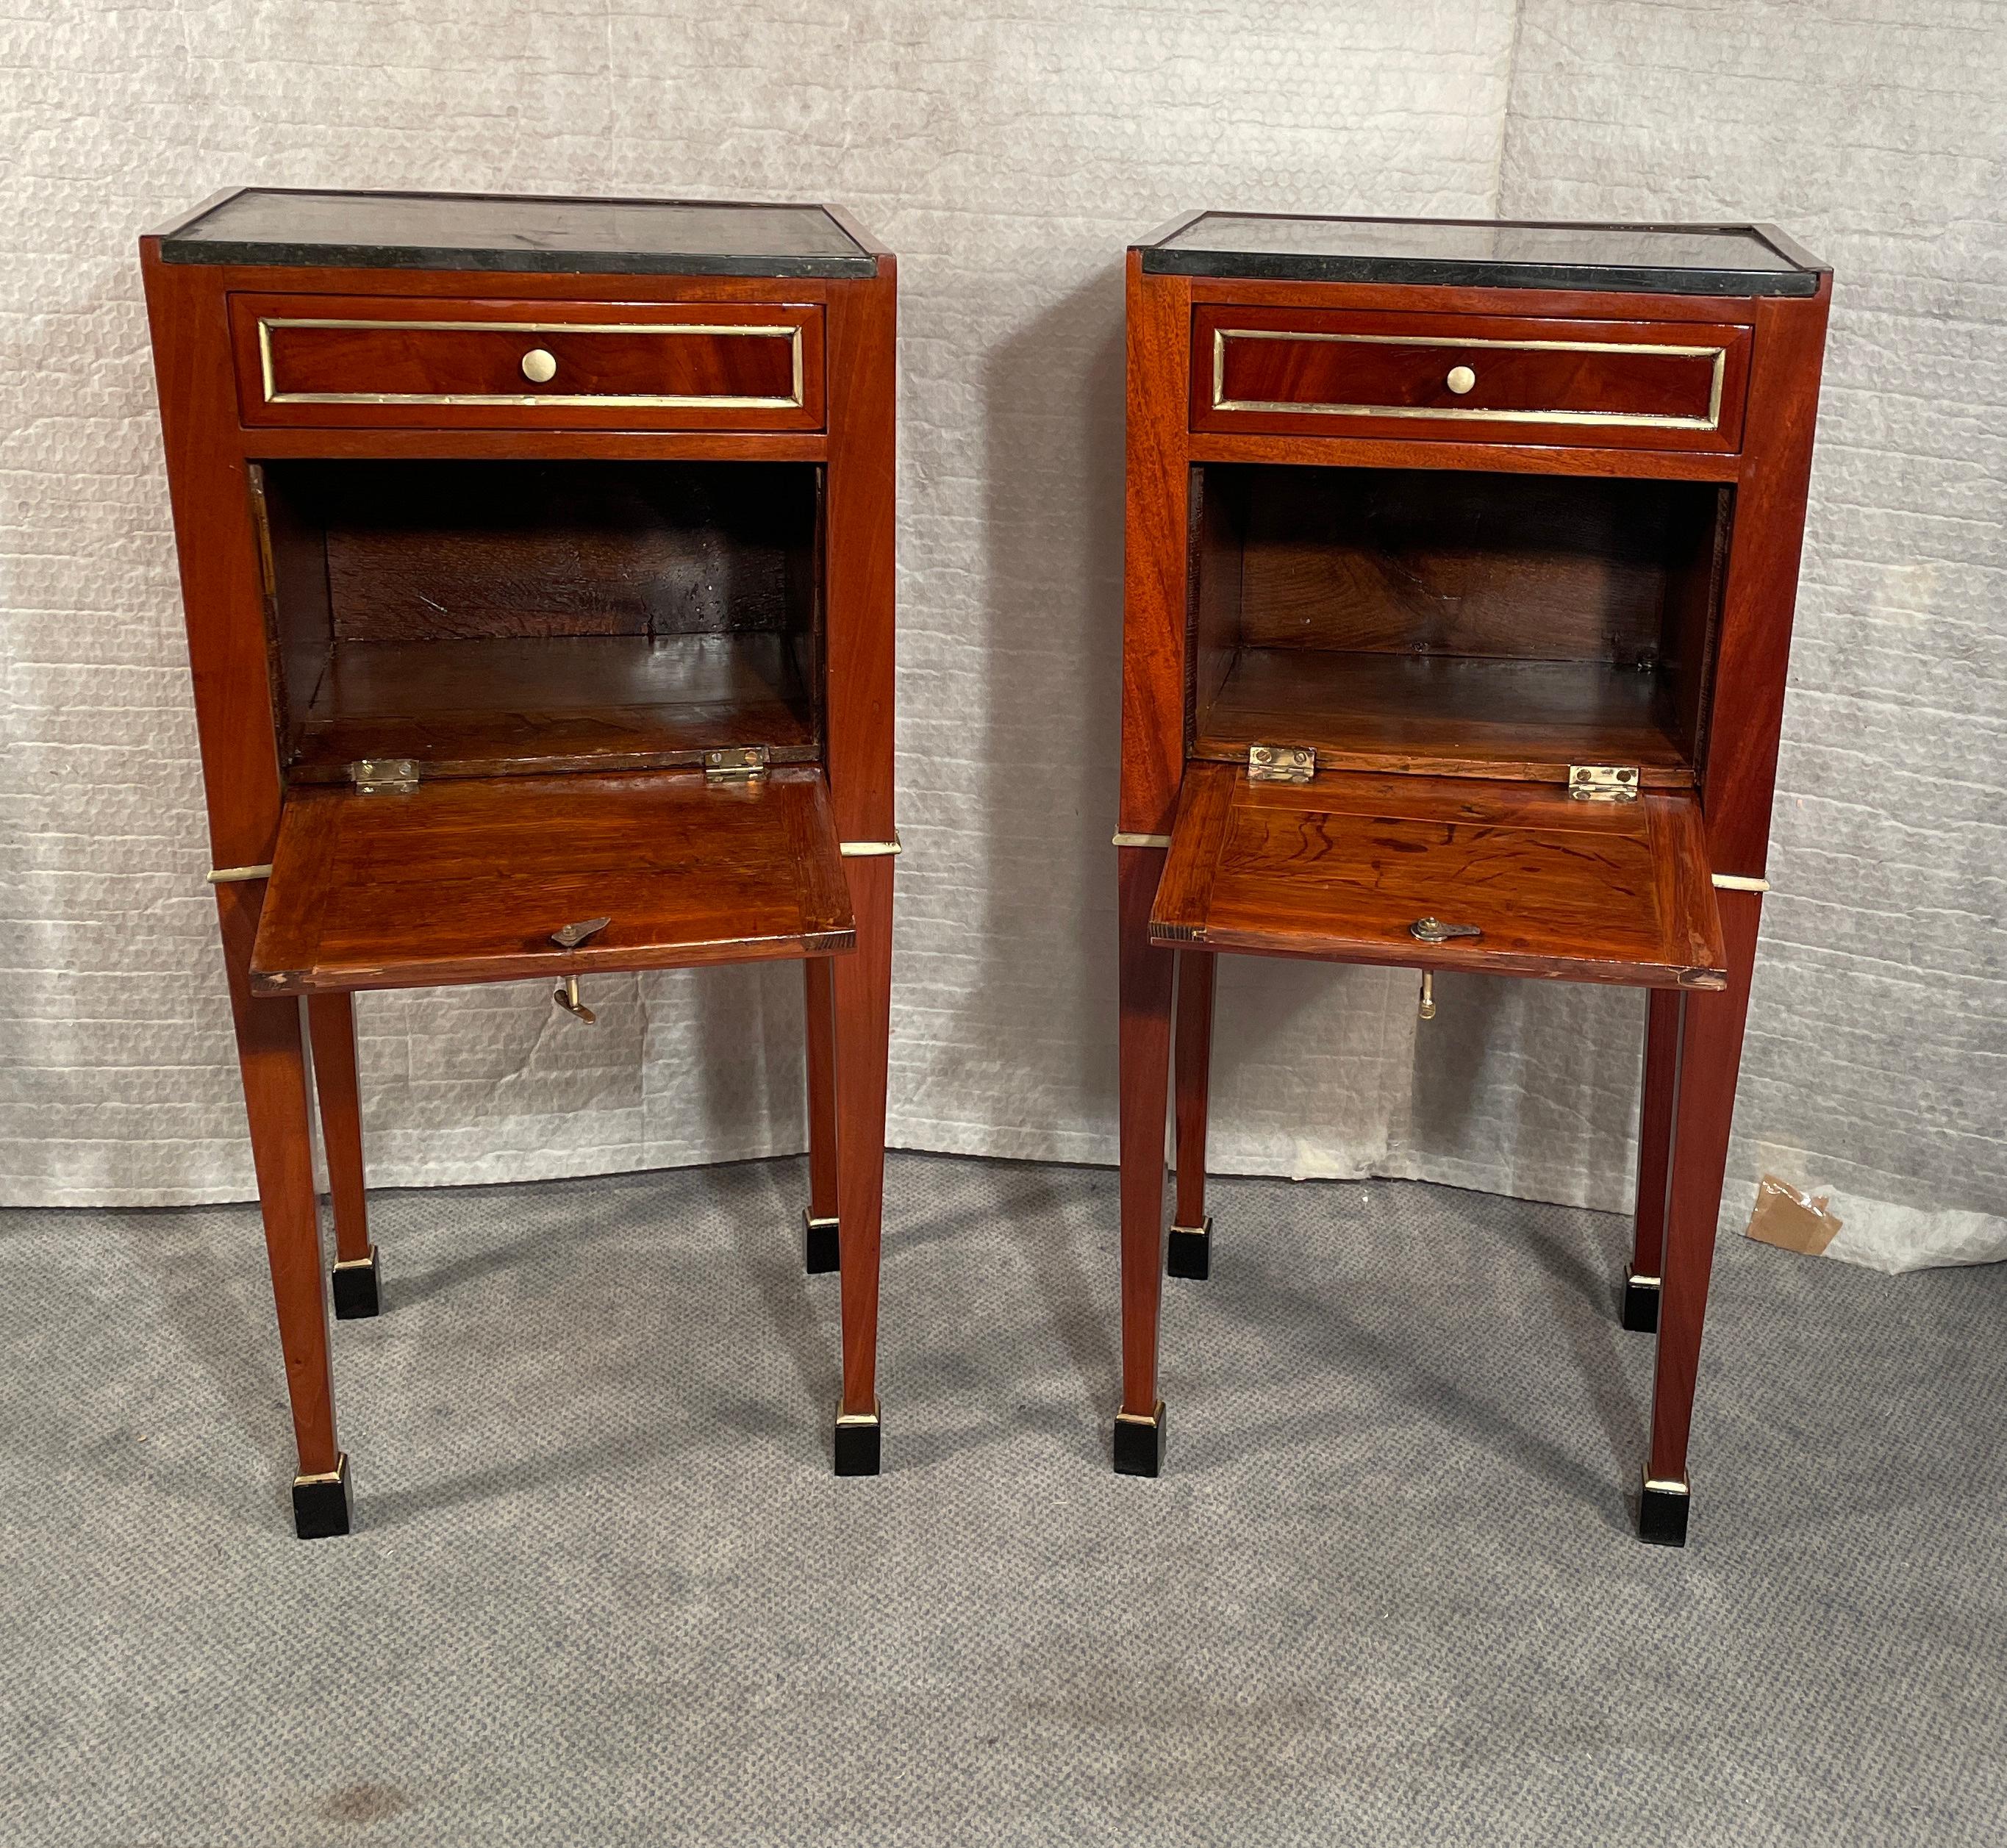 Pair of French Nightstands, Directoire Period 1780-1800

Step into a world of elegance and history with this remarkable pair of nightstands, hailing from France and dating back to the Directoire period 1780-1800.
These exquisite side tables exude